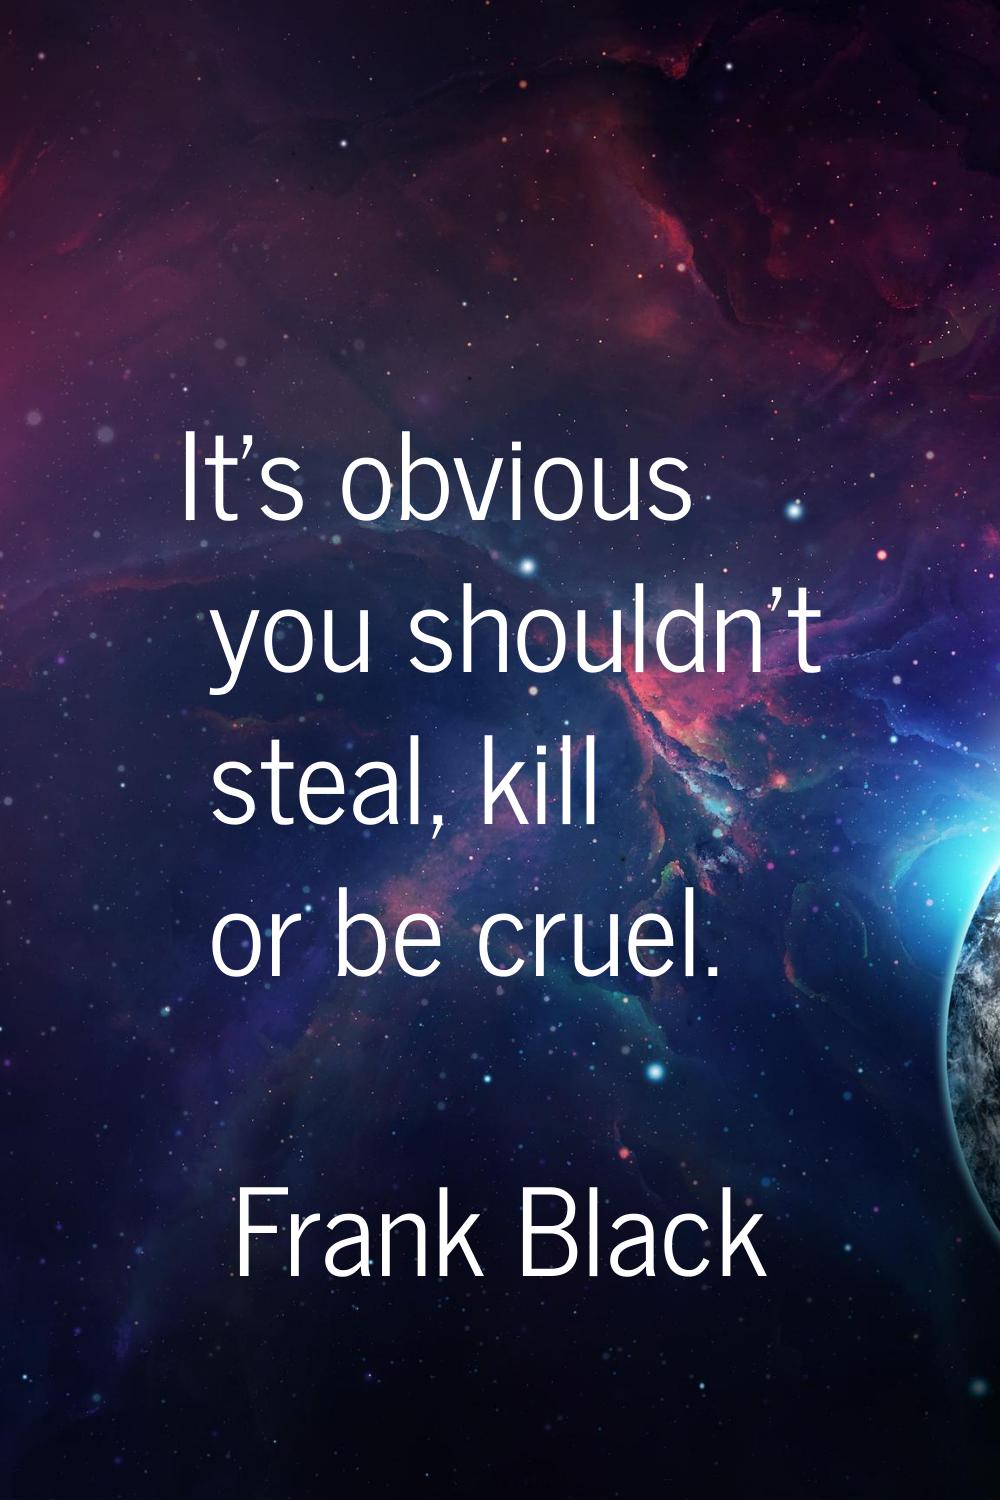 It's obvious you shouldn't steal, kill or be cruel.